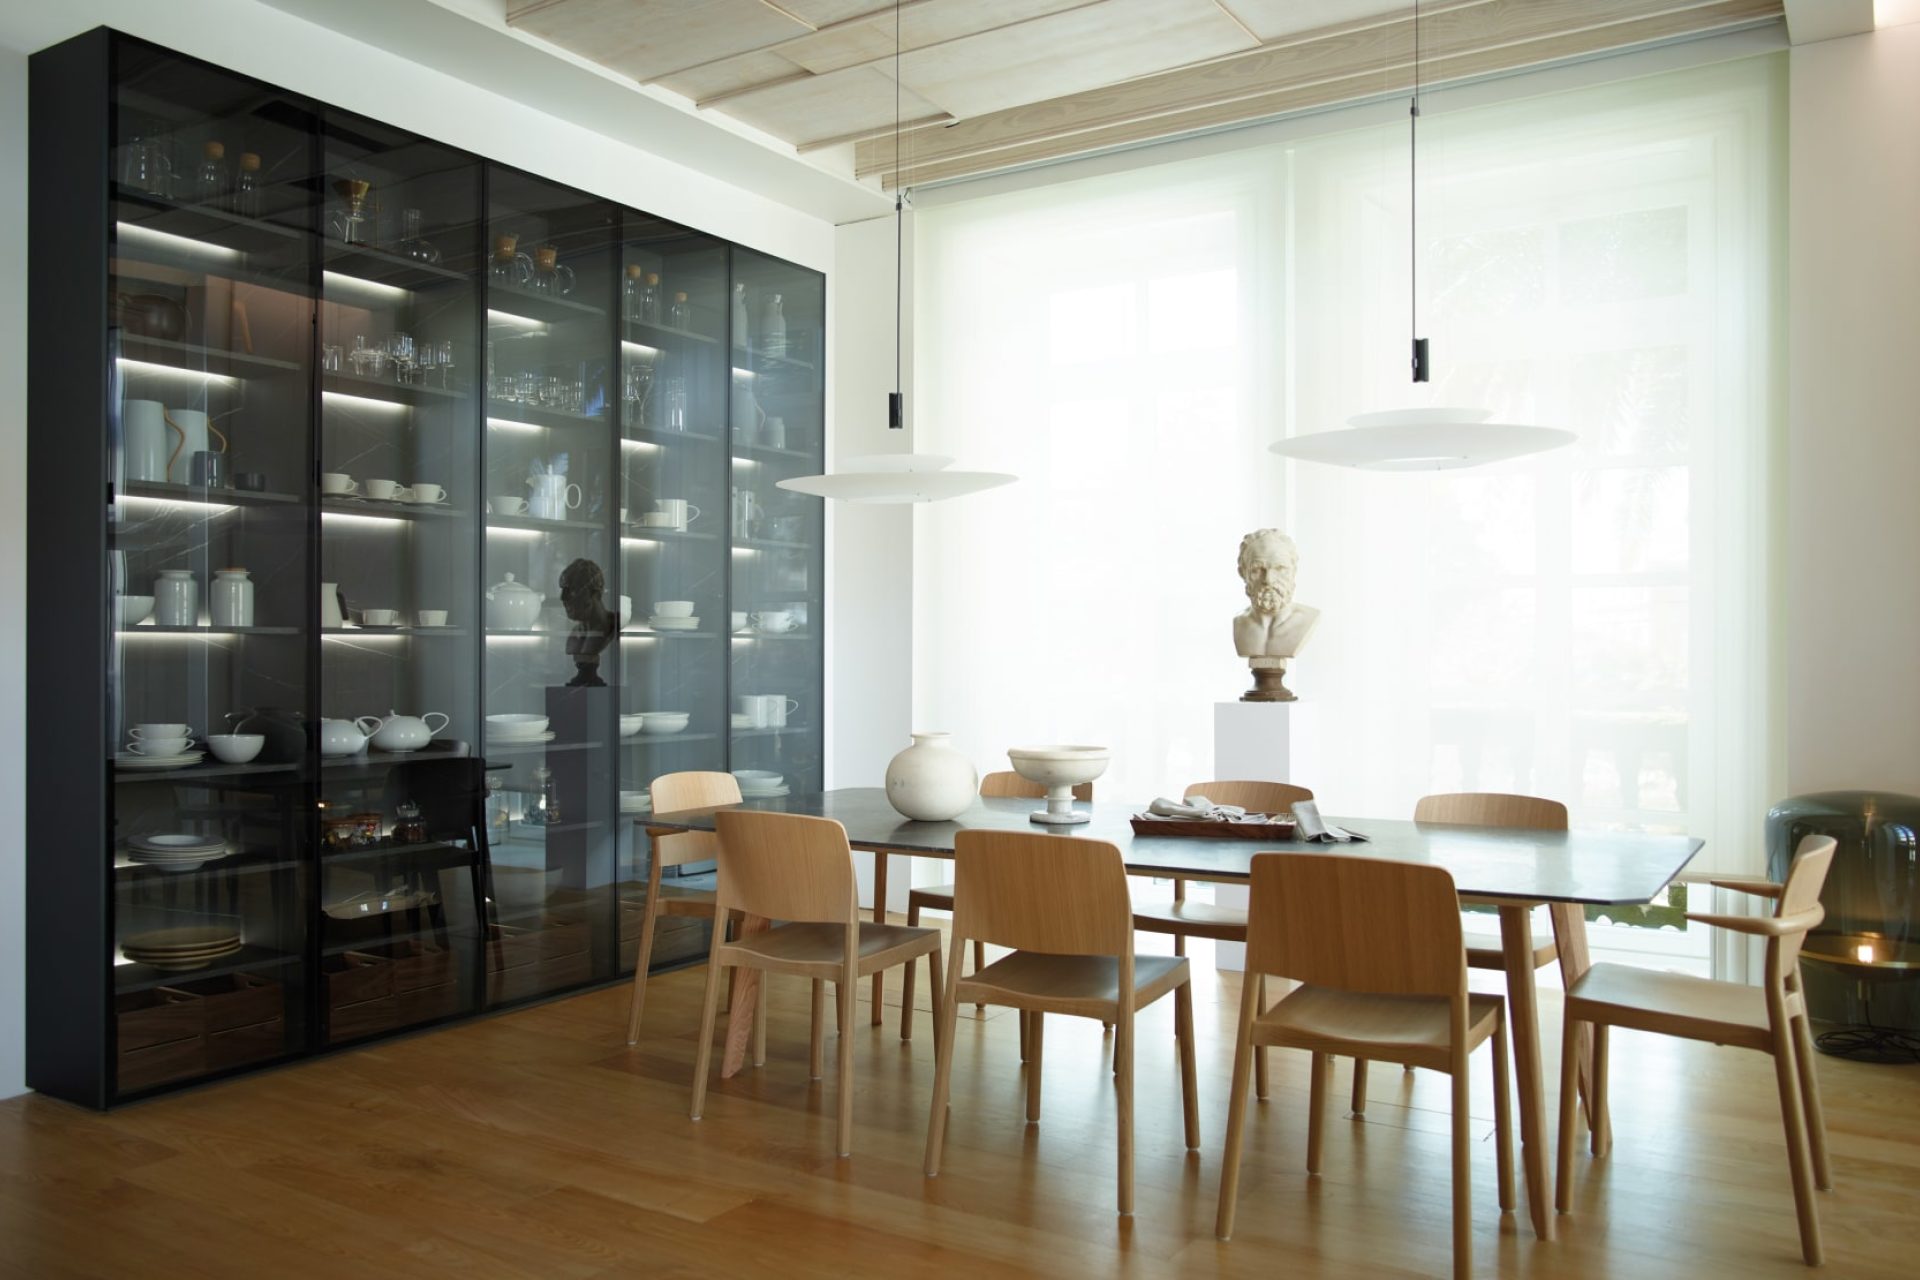 Dining room with wooden table and chairs, a black cupboard with a smoked glass front, pendant lamps and a Balloon floor lamp